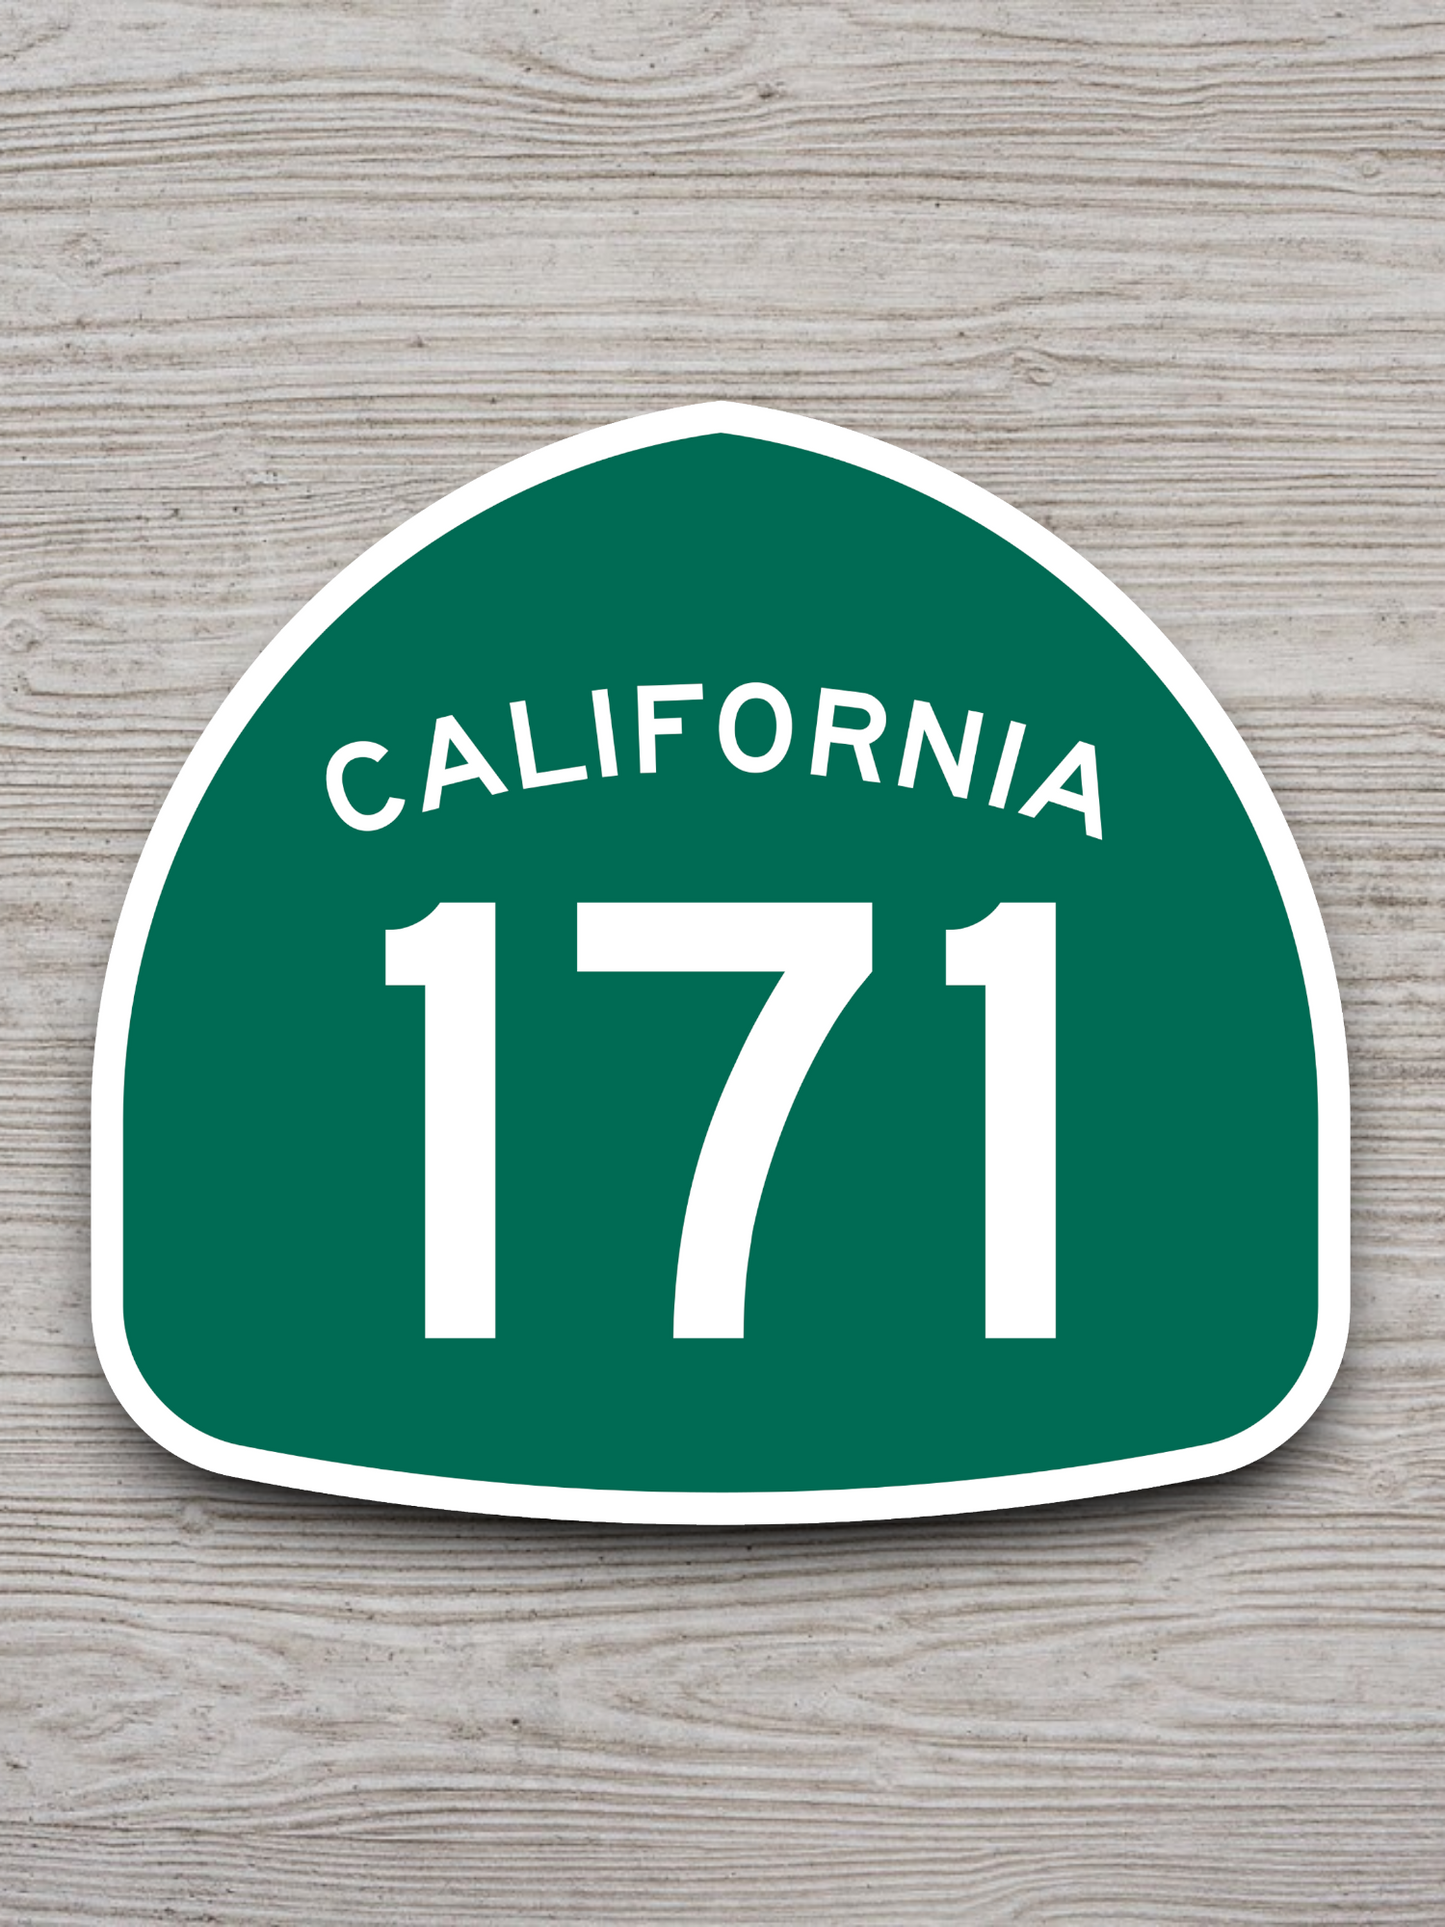 California State Route 171 Road Sign Sticker